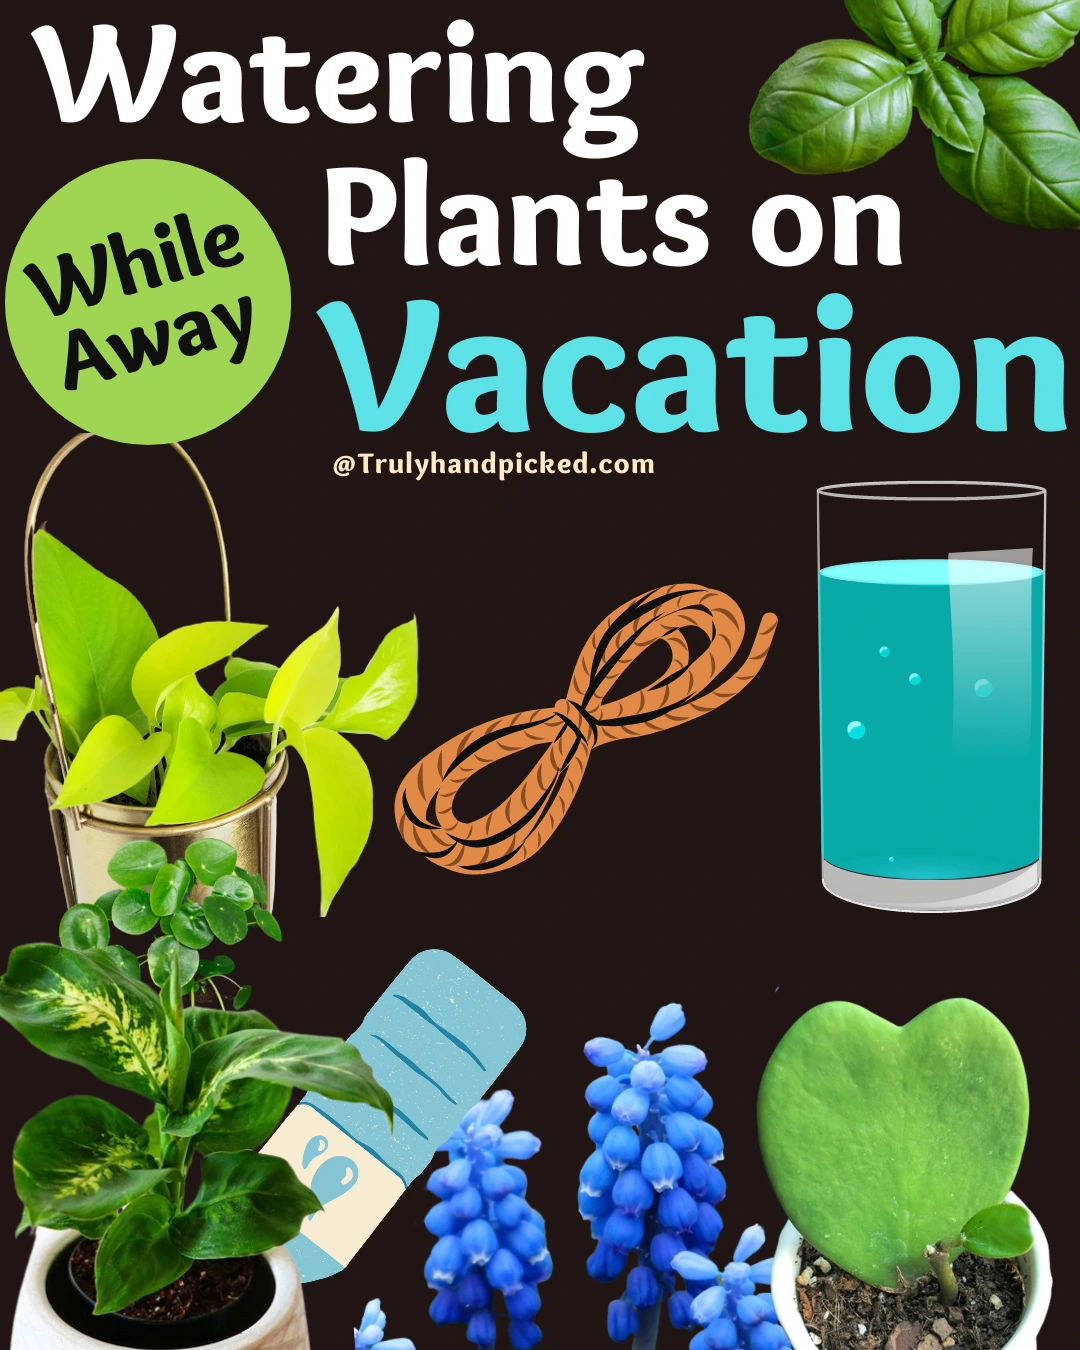 How to water my plants while away watering plants during vacation